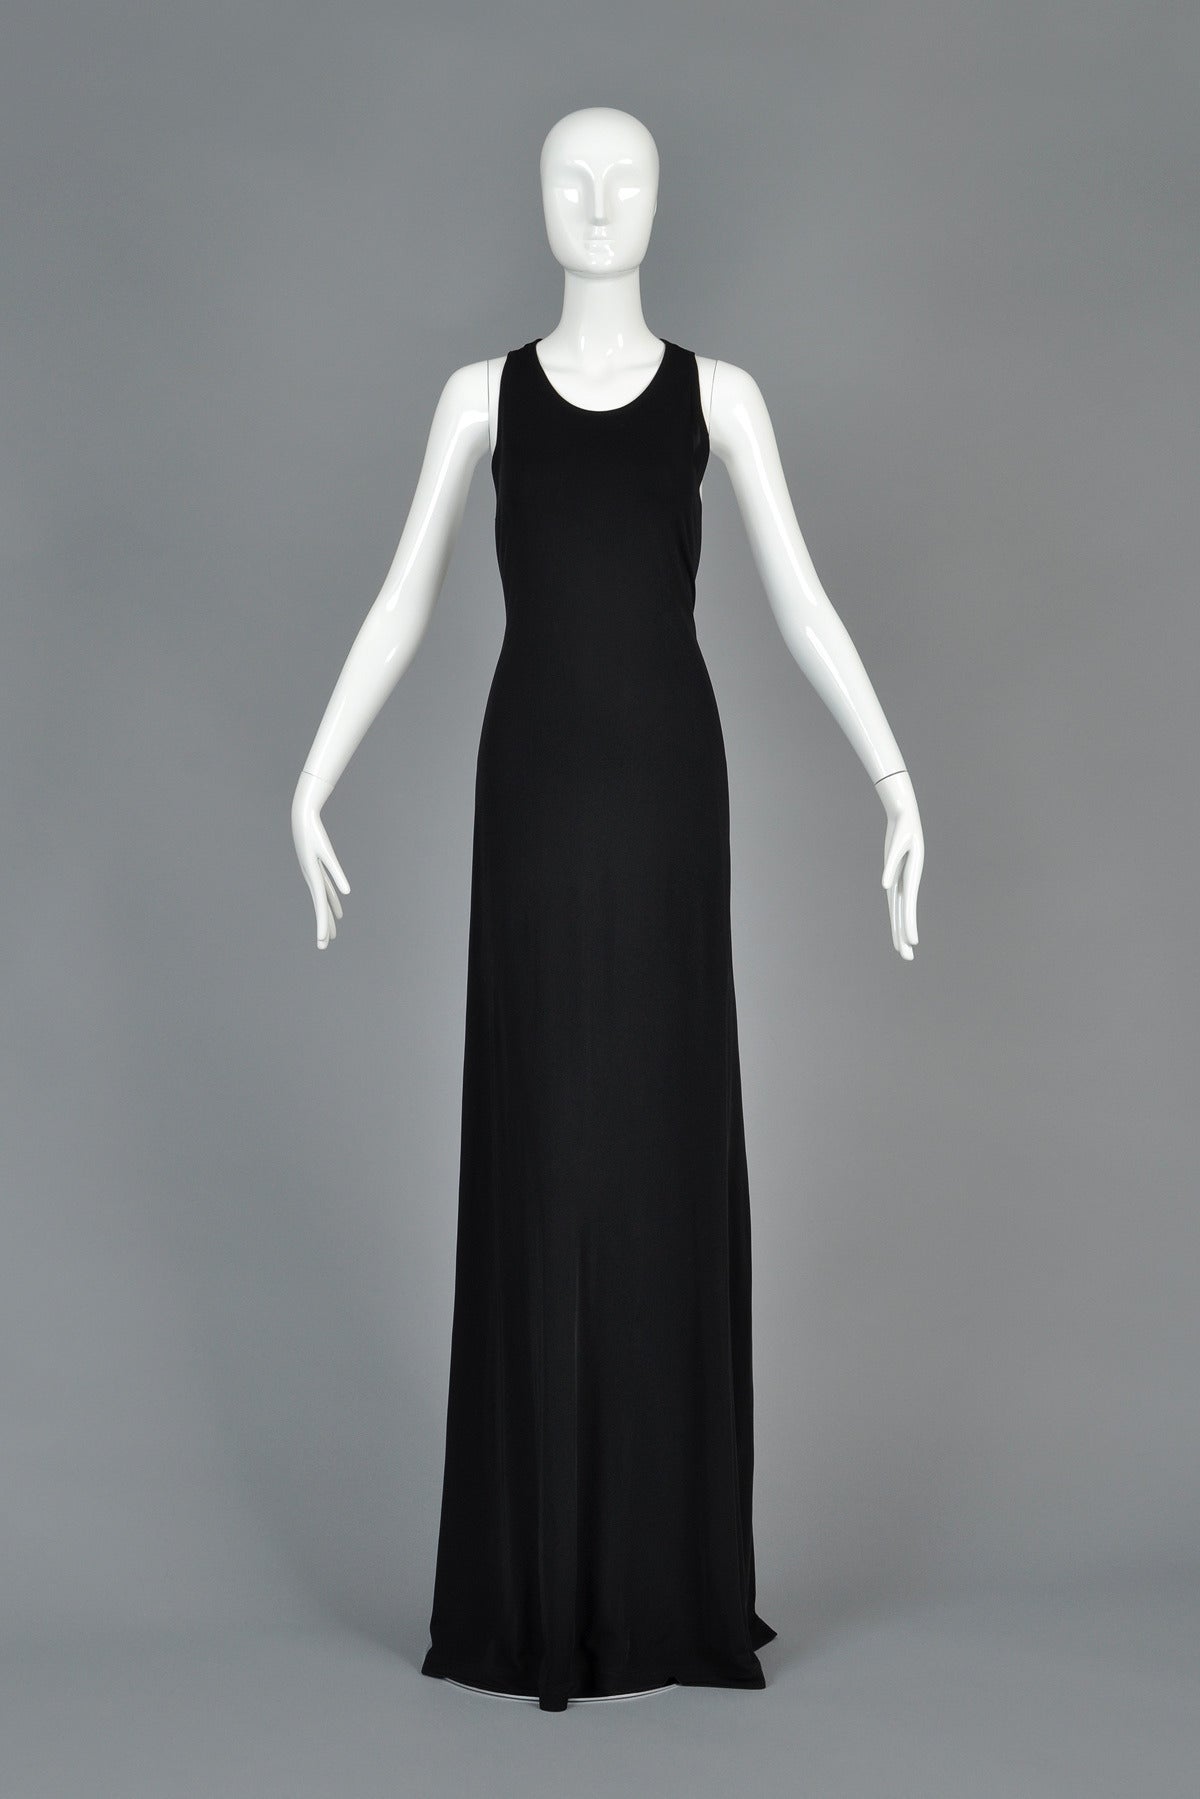 Absolutely beautiful Calvin Klein Collection black evening gown. The ultimate in slinky black dresses! Dress features high neckline with deep cutting underarms (nearly to the waist!) and huge slits up each side in the back. Ultra long, supermodel